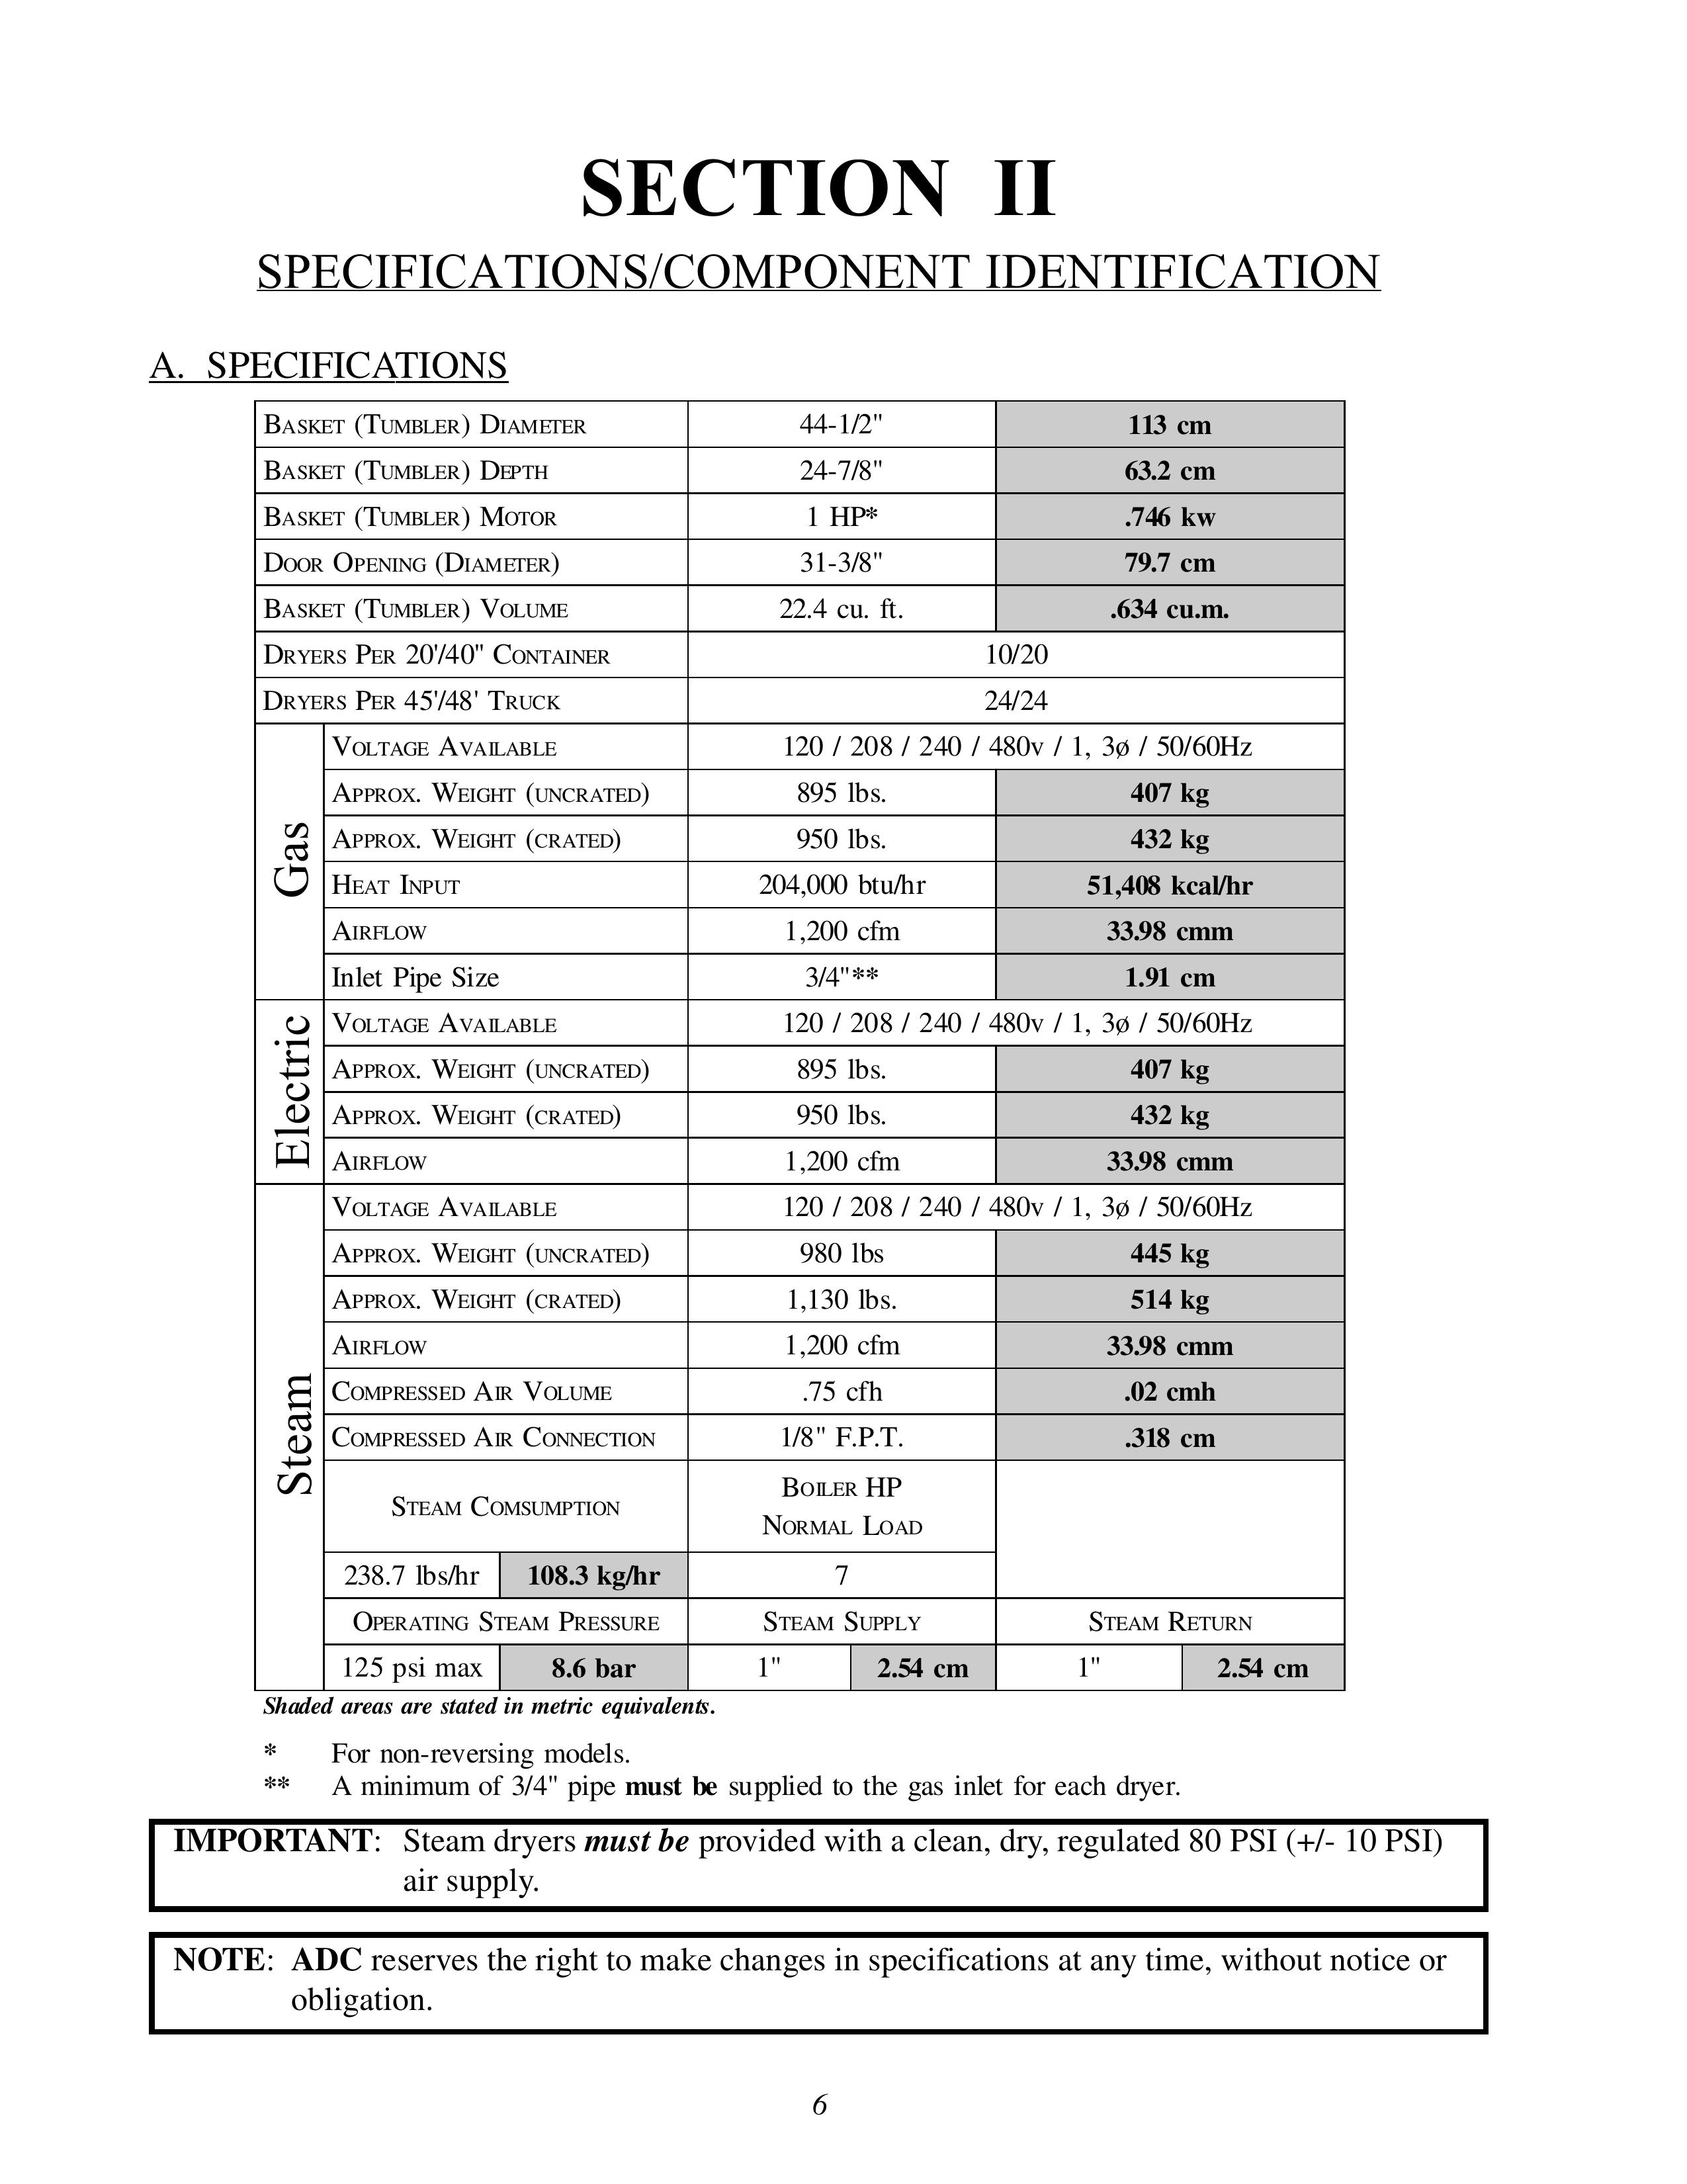 ADC AD-78 Clothes Dryer User Manual (Page 10)